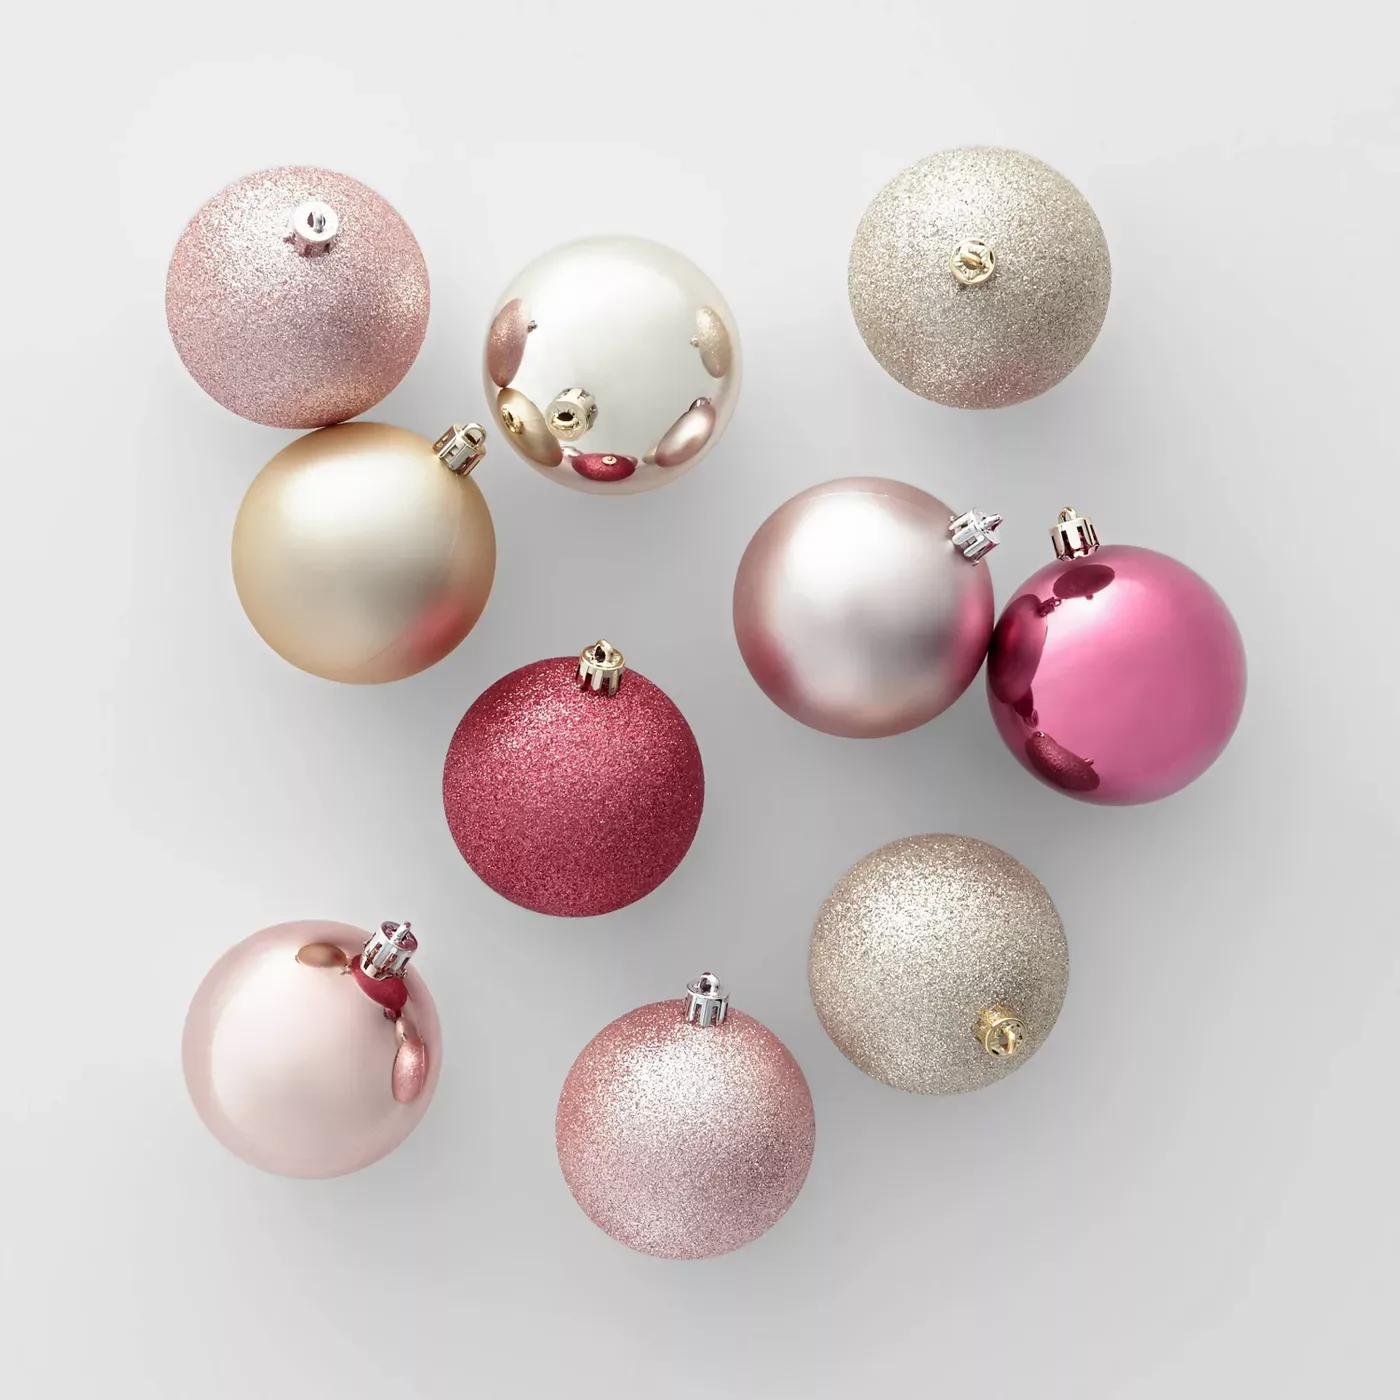 Details about  / Rose gold mini /& Champagne Ornaments